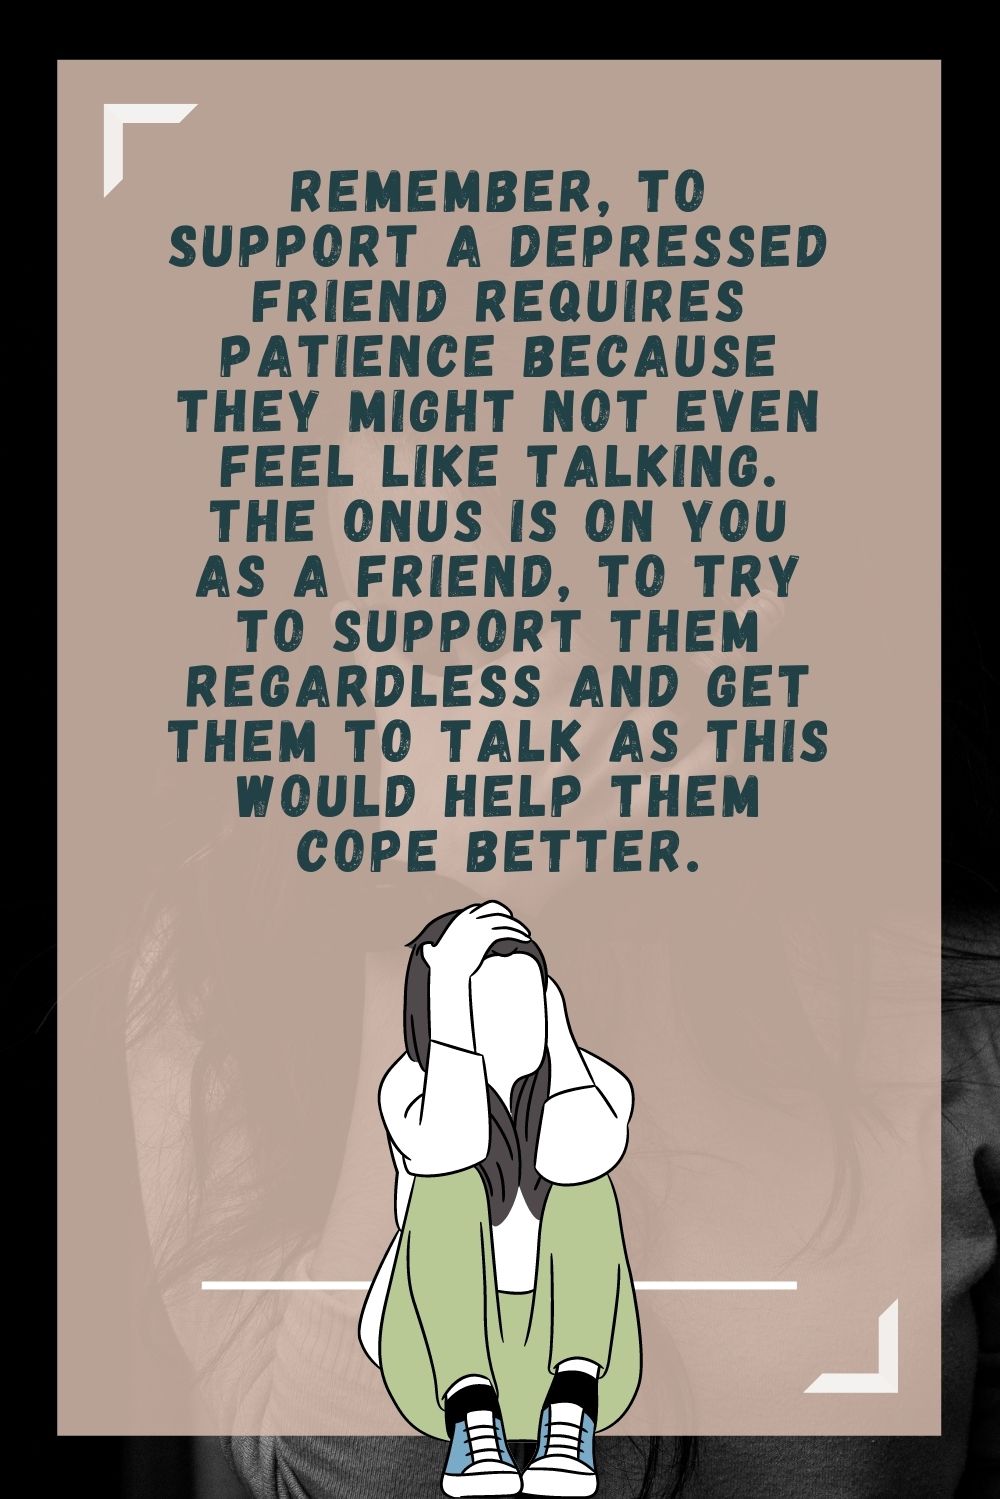 to support a depressed friend requires patience because they might not even feel like talking